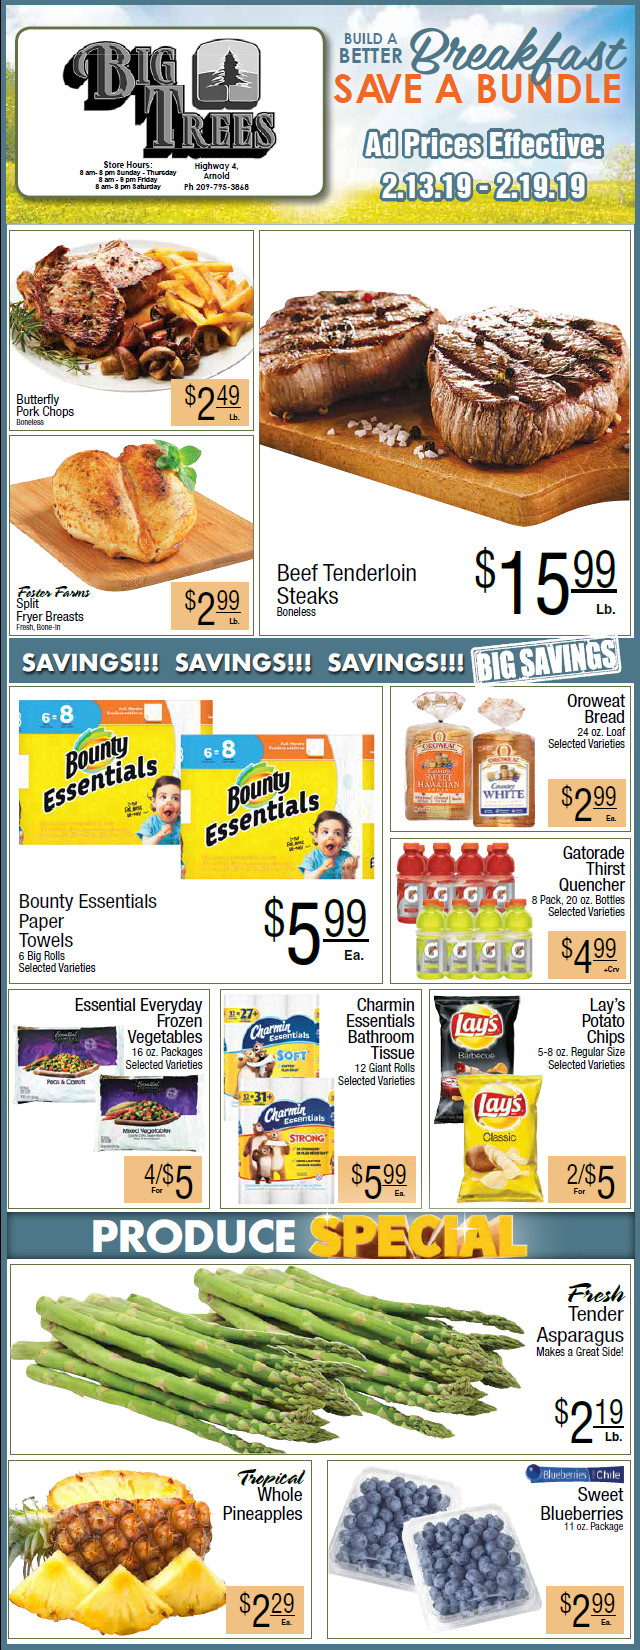 Big Trees Market Weekly Ad & Grocery Specials Through Feb 19th